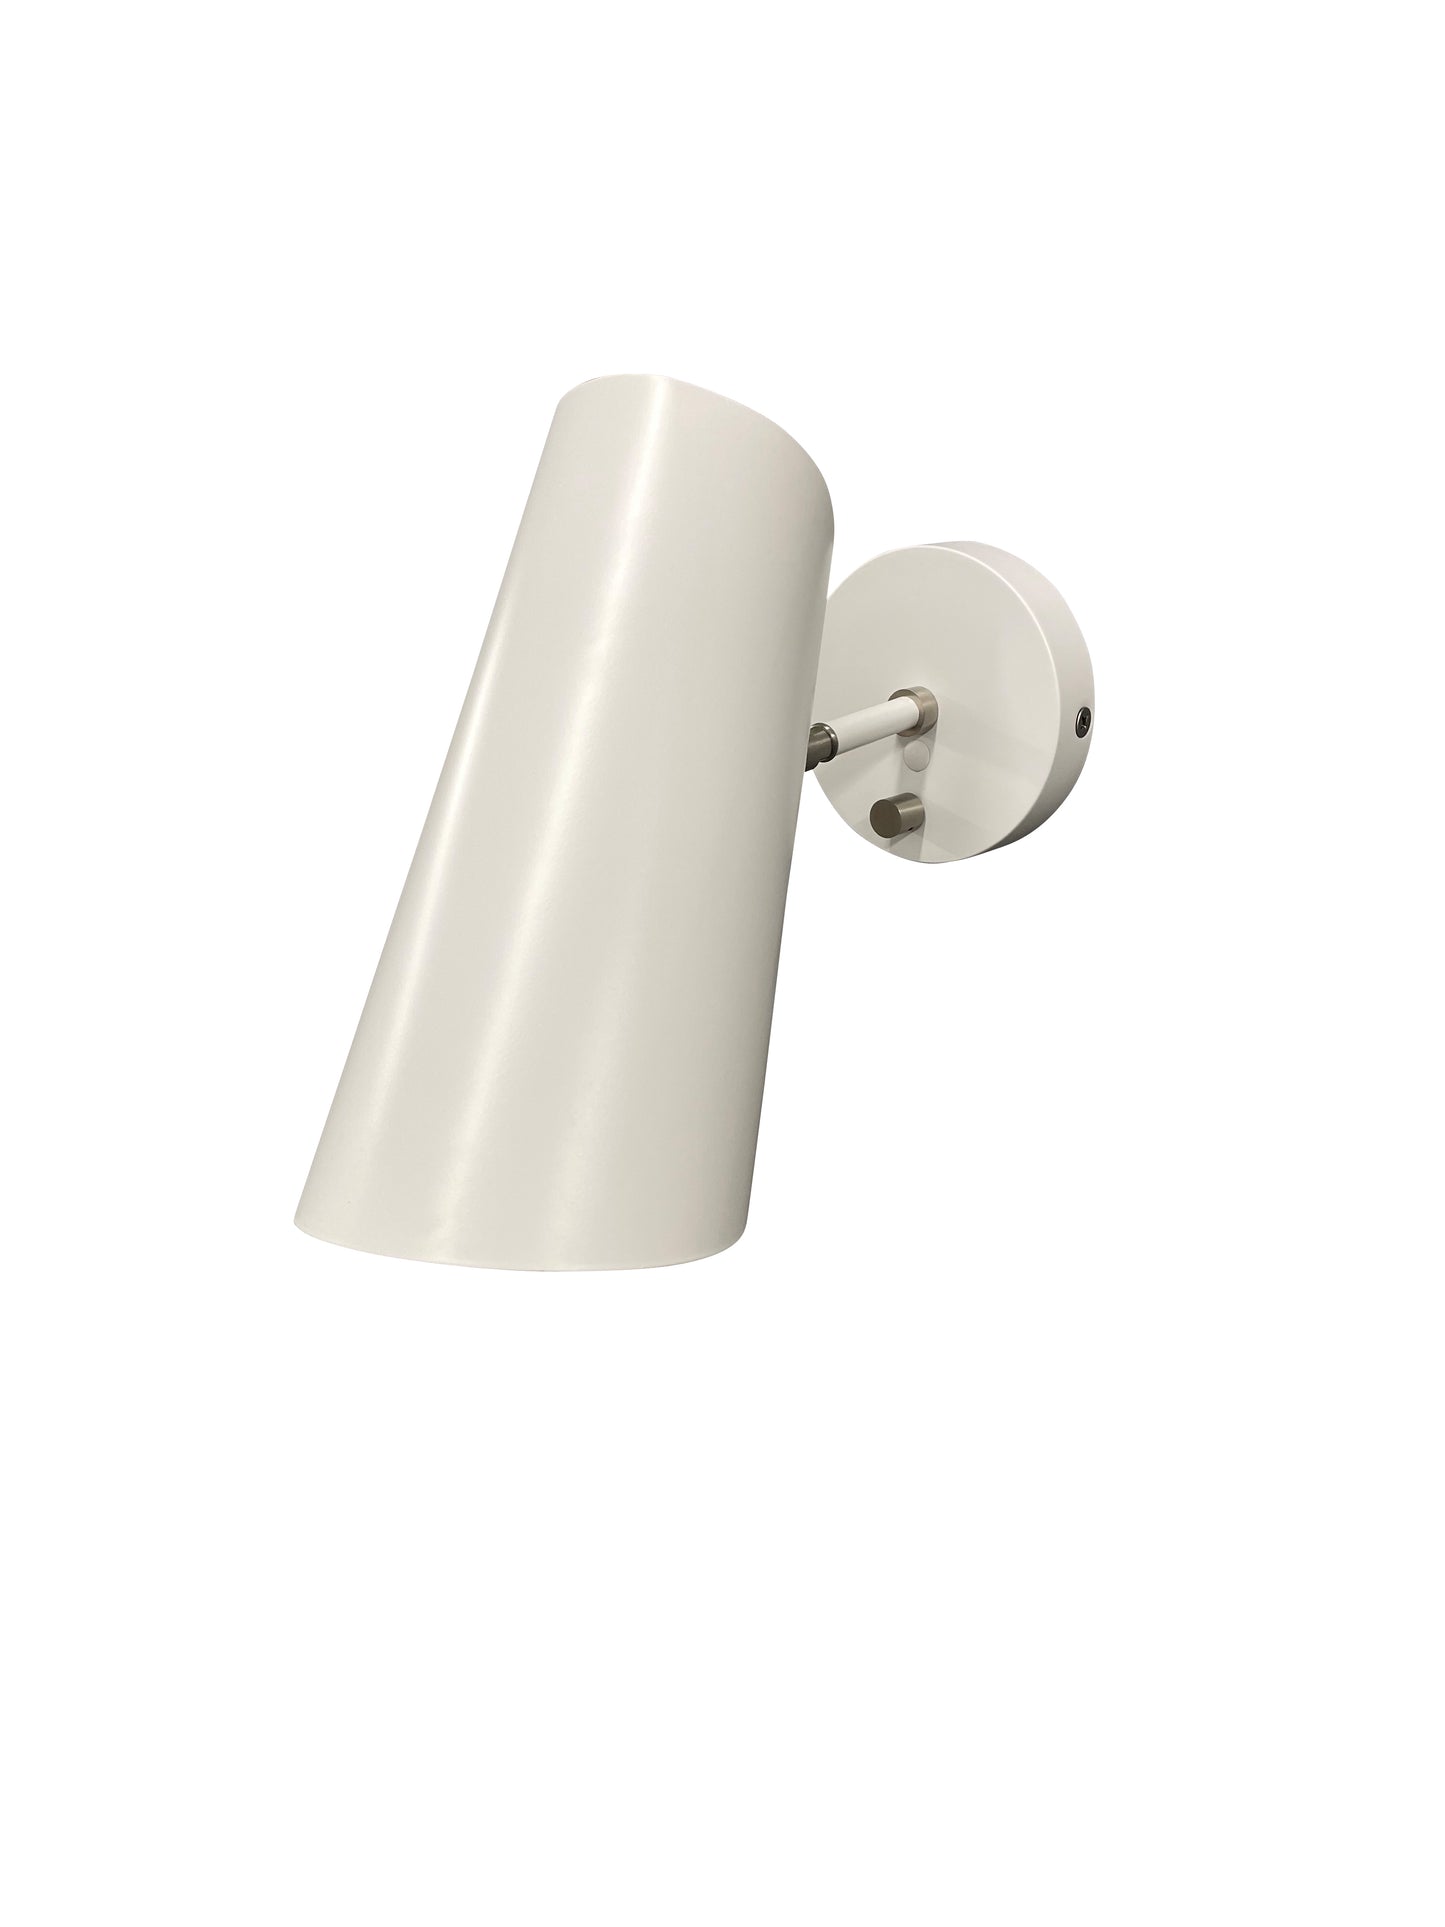 House of Troy Logan White Satin Nickel Wall Sconce Rolled L325-WTSN